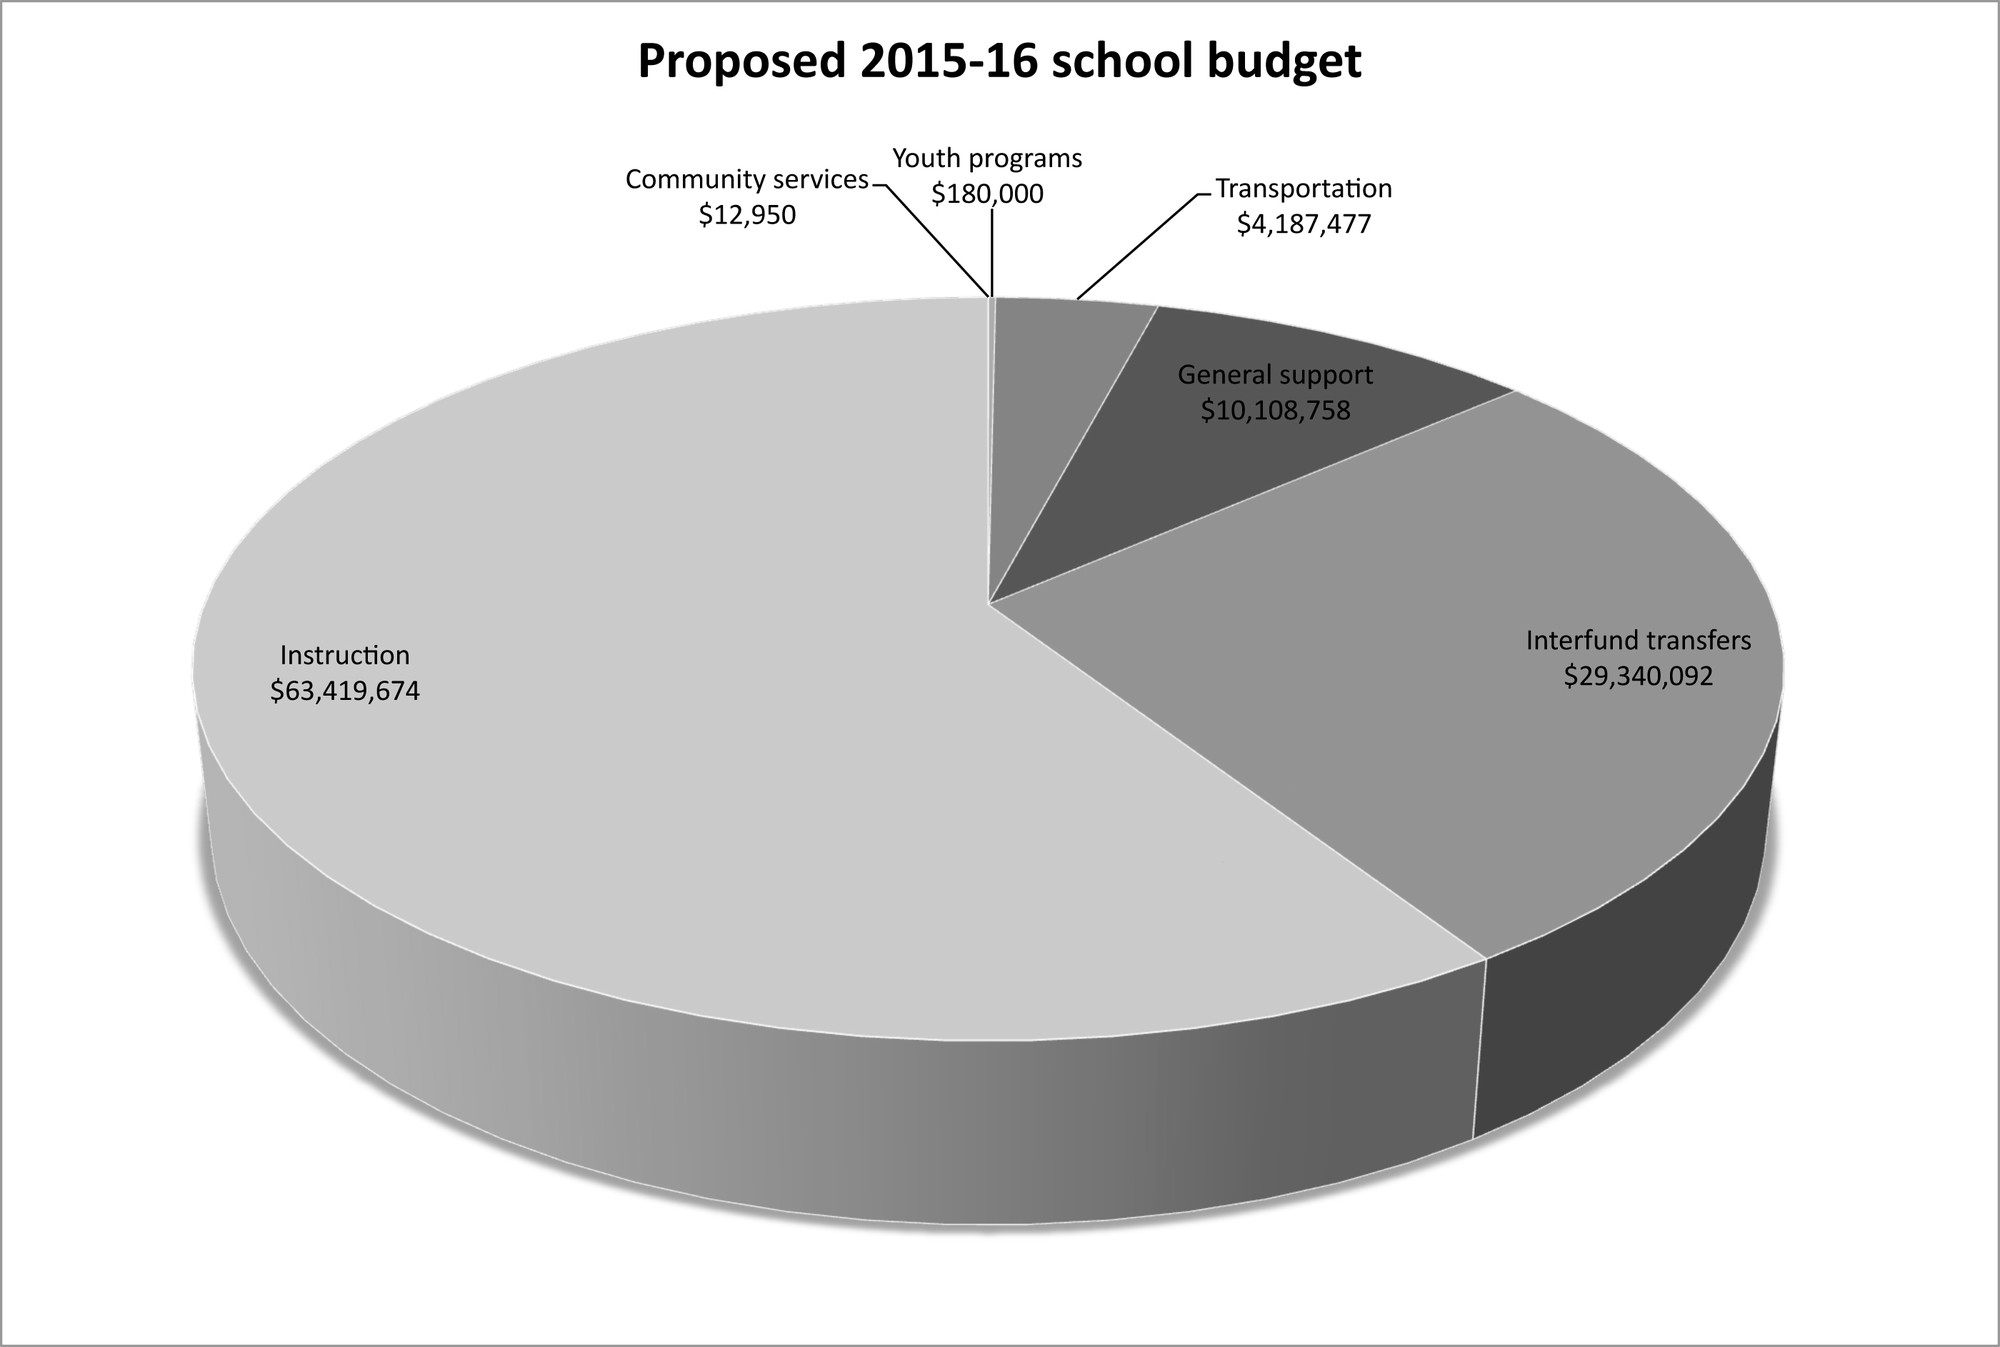 The largest portion of the budget is instructional spending, which includes teacher salaries.